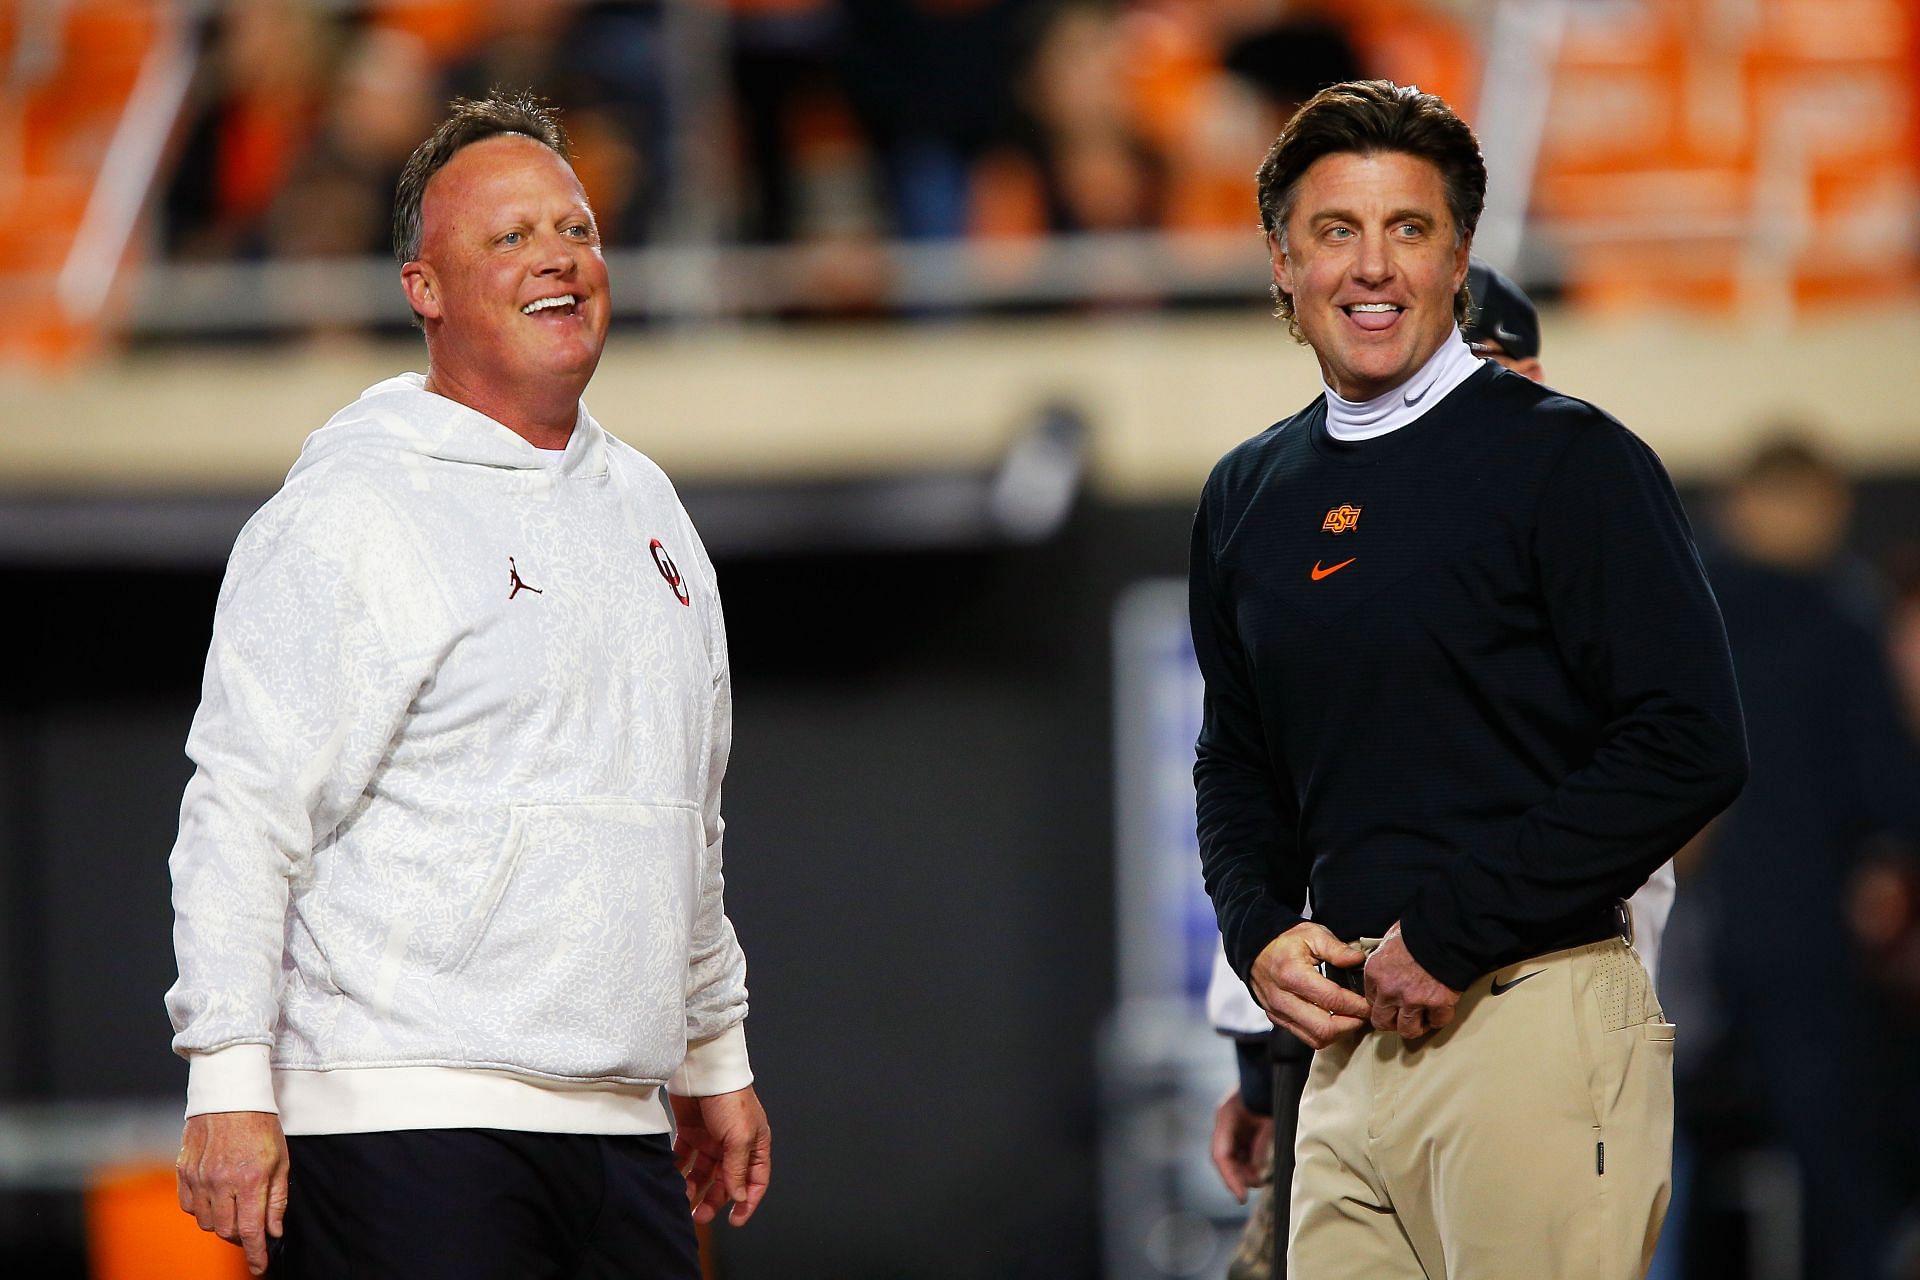 Cale Gundy (left) with his brother during an Oklahoma v Oklahoma State game